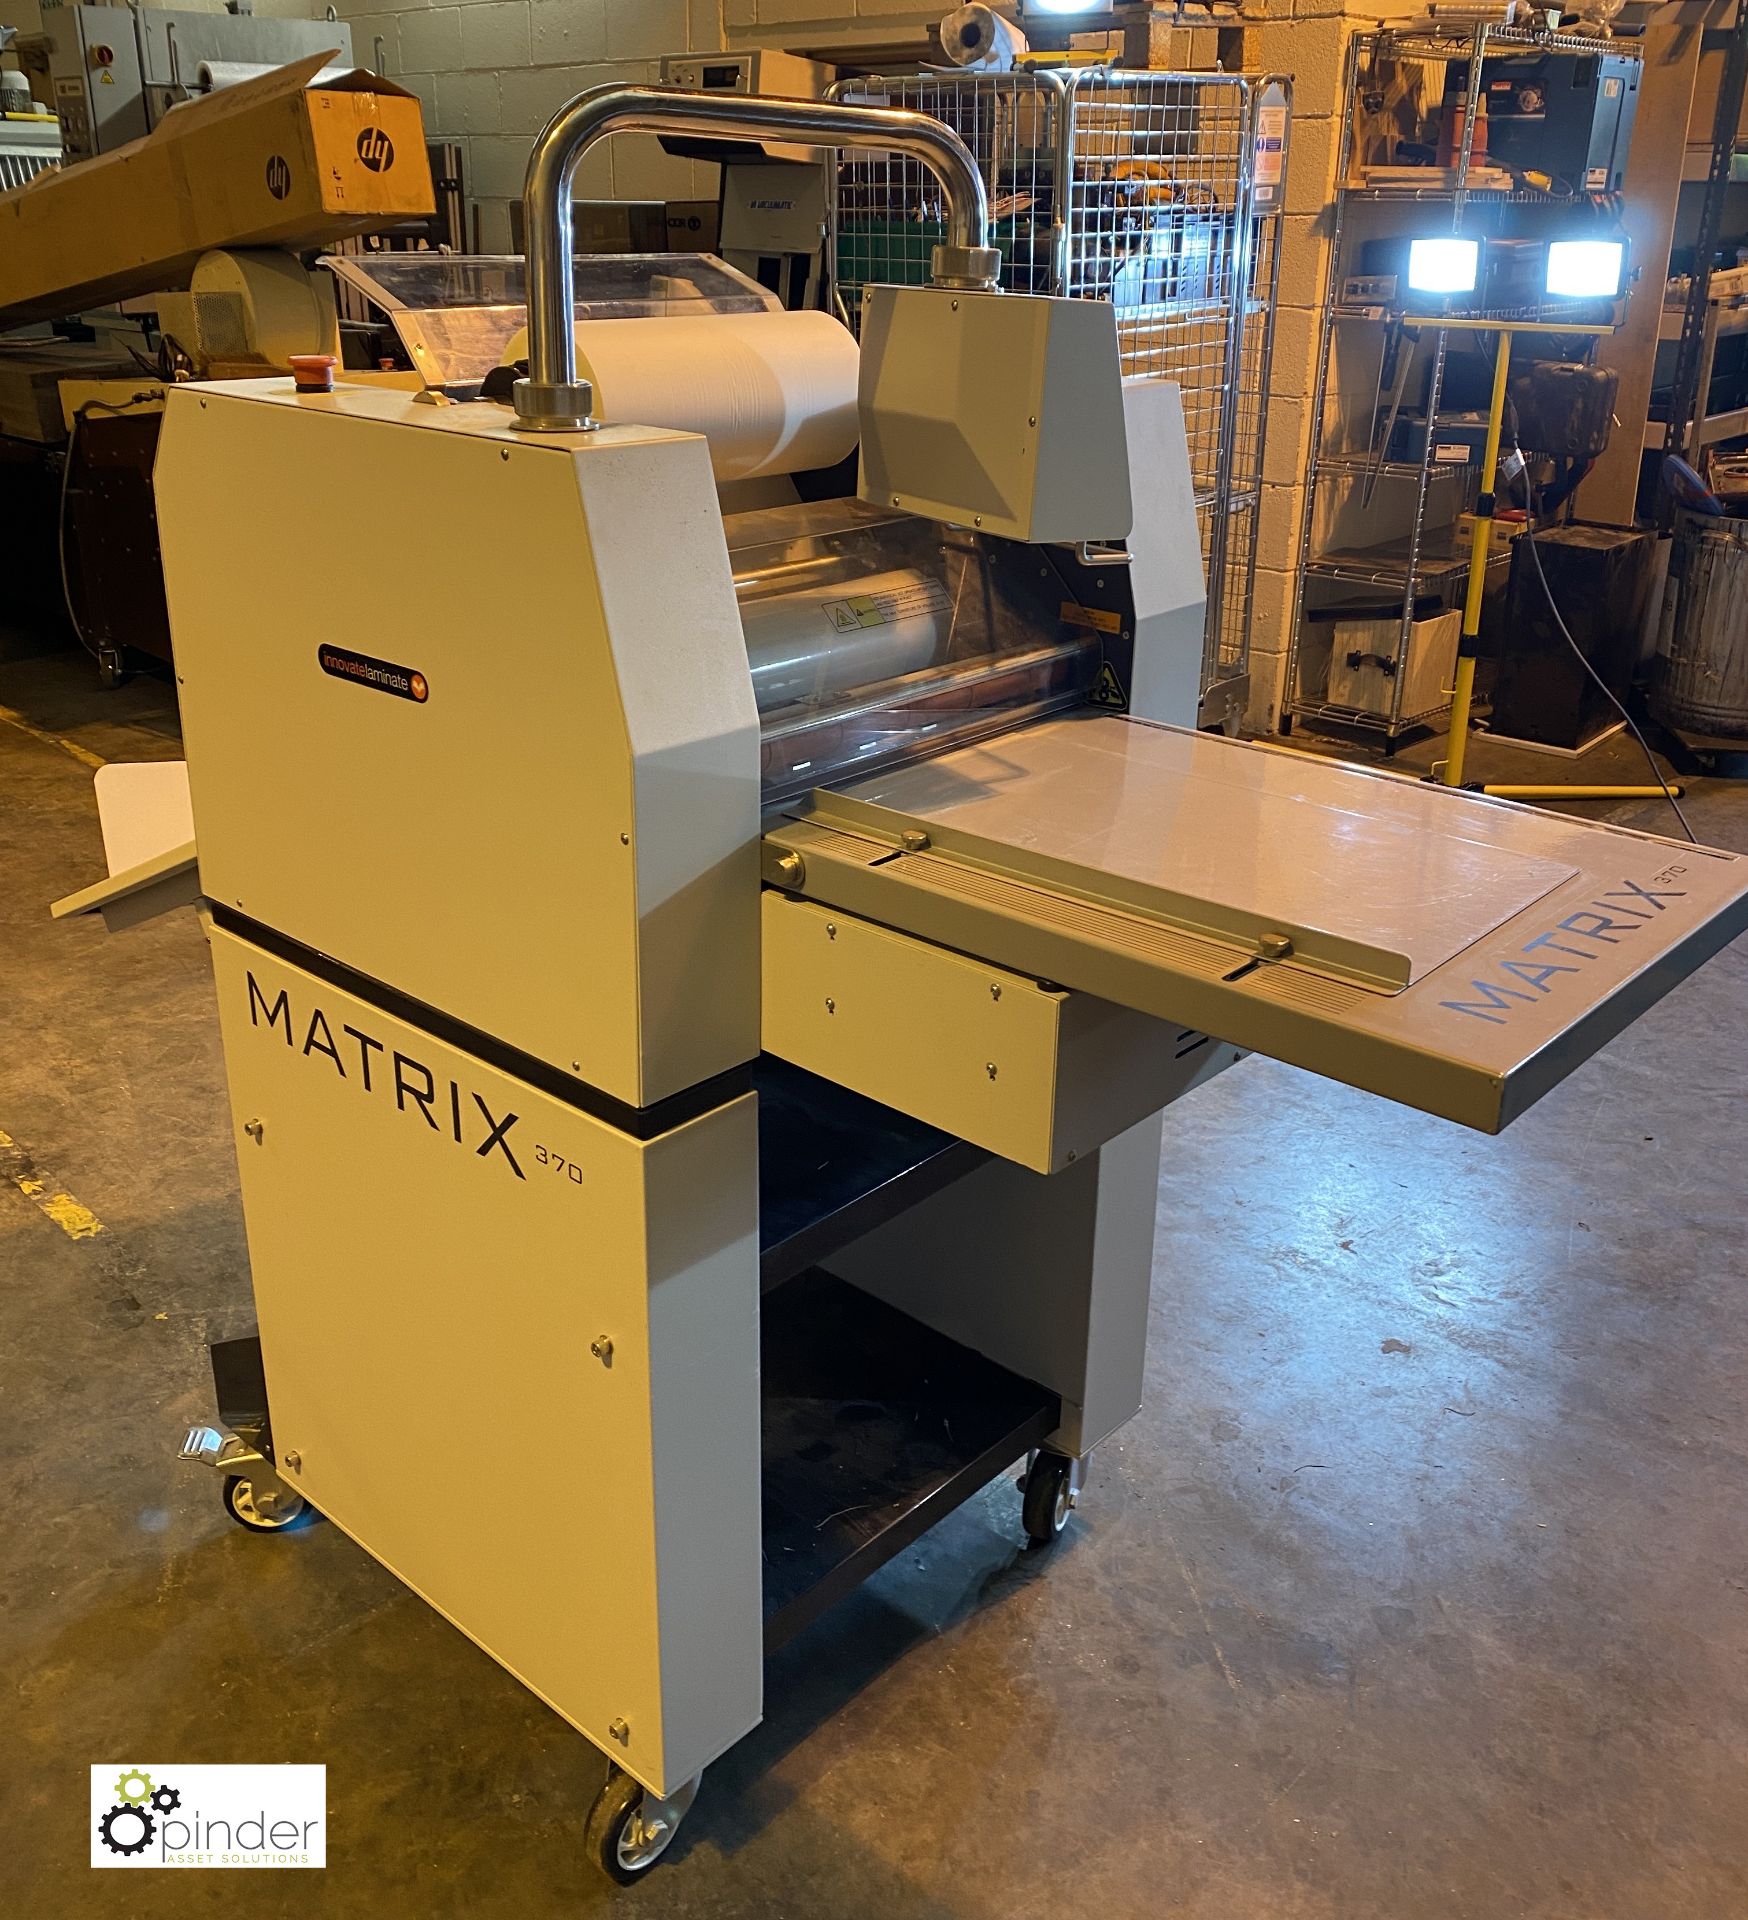 Matrix 370 Roll Laminator, 315mm width, 240volts, serial number 1112MX-370074, with 5 part rolls - Image 10 of 12